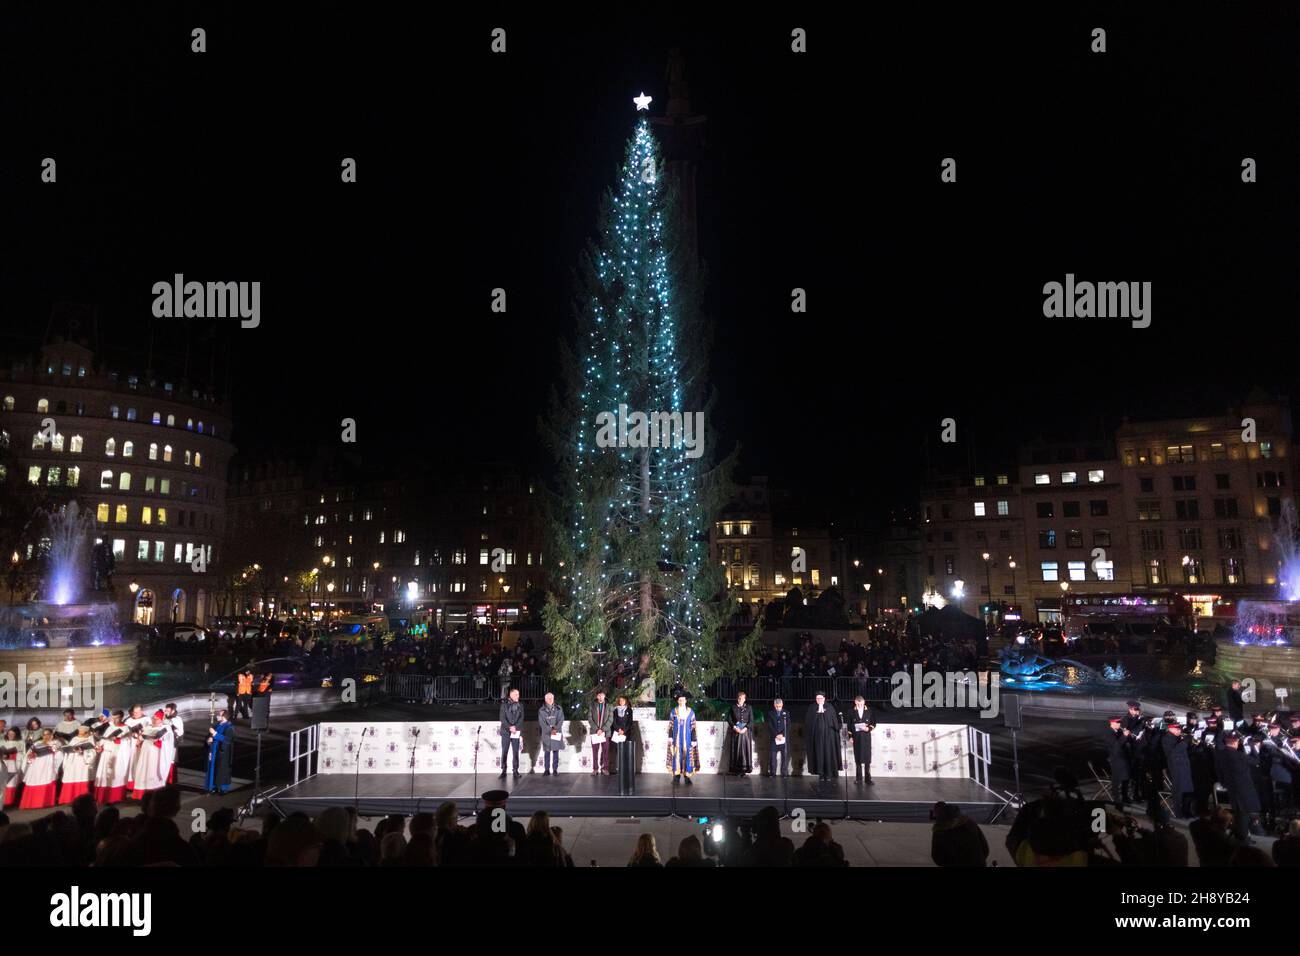 Guests and dignitaries seen singing a hymn on stage, including Mayor of London Sadiq Khan (R4), Lord Mayor of Westminster Councillor Andrew Smith (L3), and Mayor of Oslo Marianne Borgen (R3), during the ceremony.The annual Trafalgar Christmas Tree Ceremony has taken place since the 1947s. A giant Norwegian spruce, standing at 25 meters tall, is gifted by the people of Norway to London in recognition of Britain's support during the Second World War. The Christmas tree is lit up during the ceremony, with choirs and bands performing Christmas Carols. Stock Photo